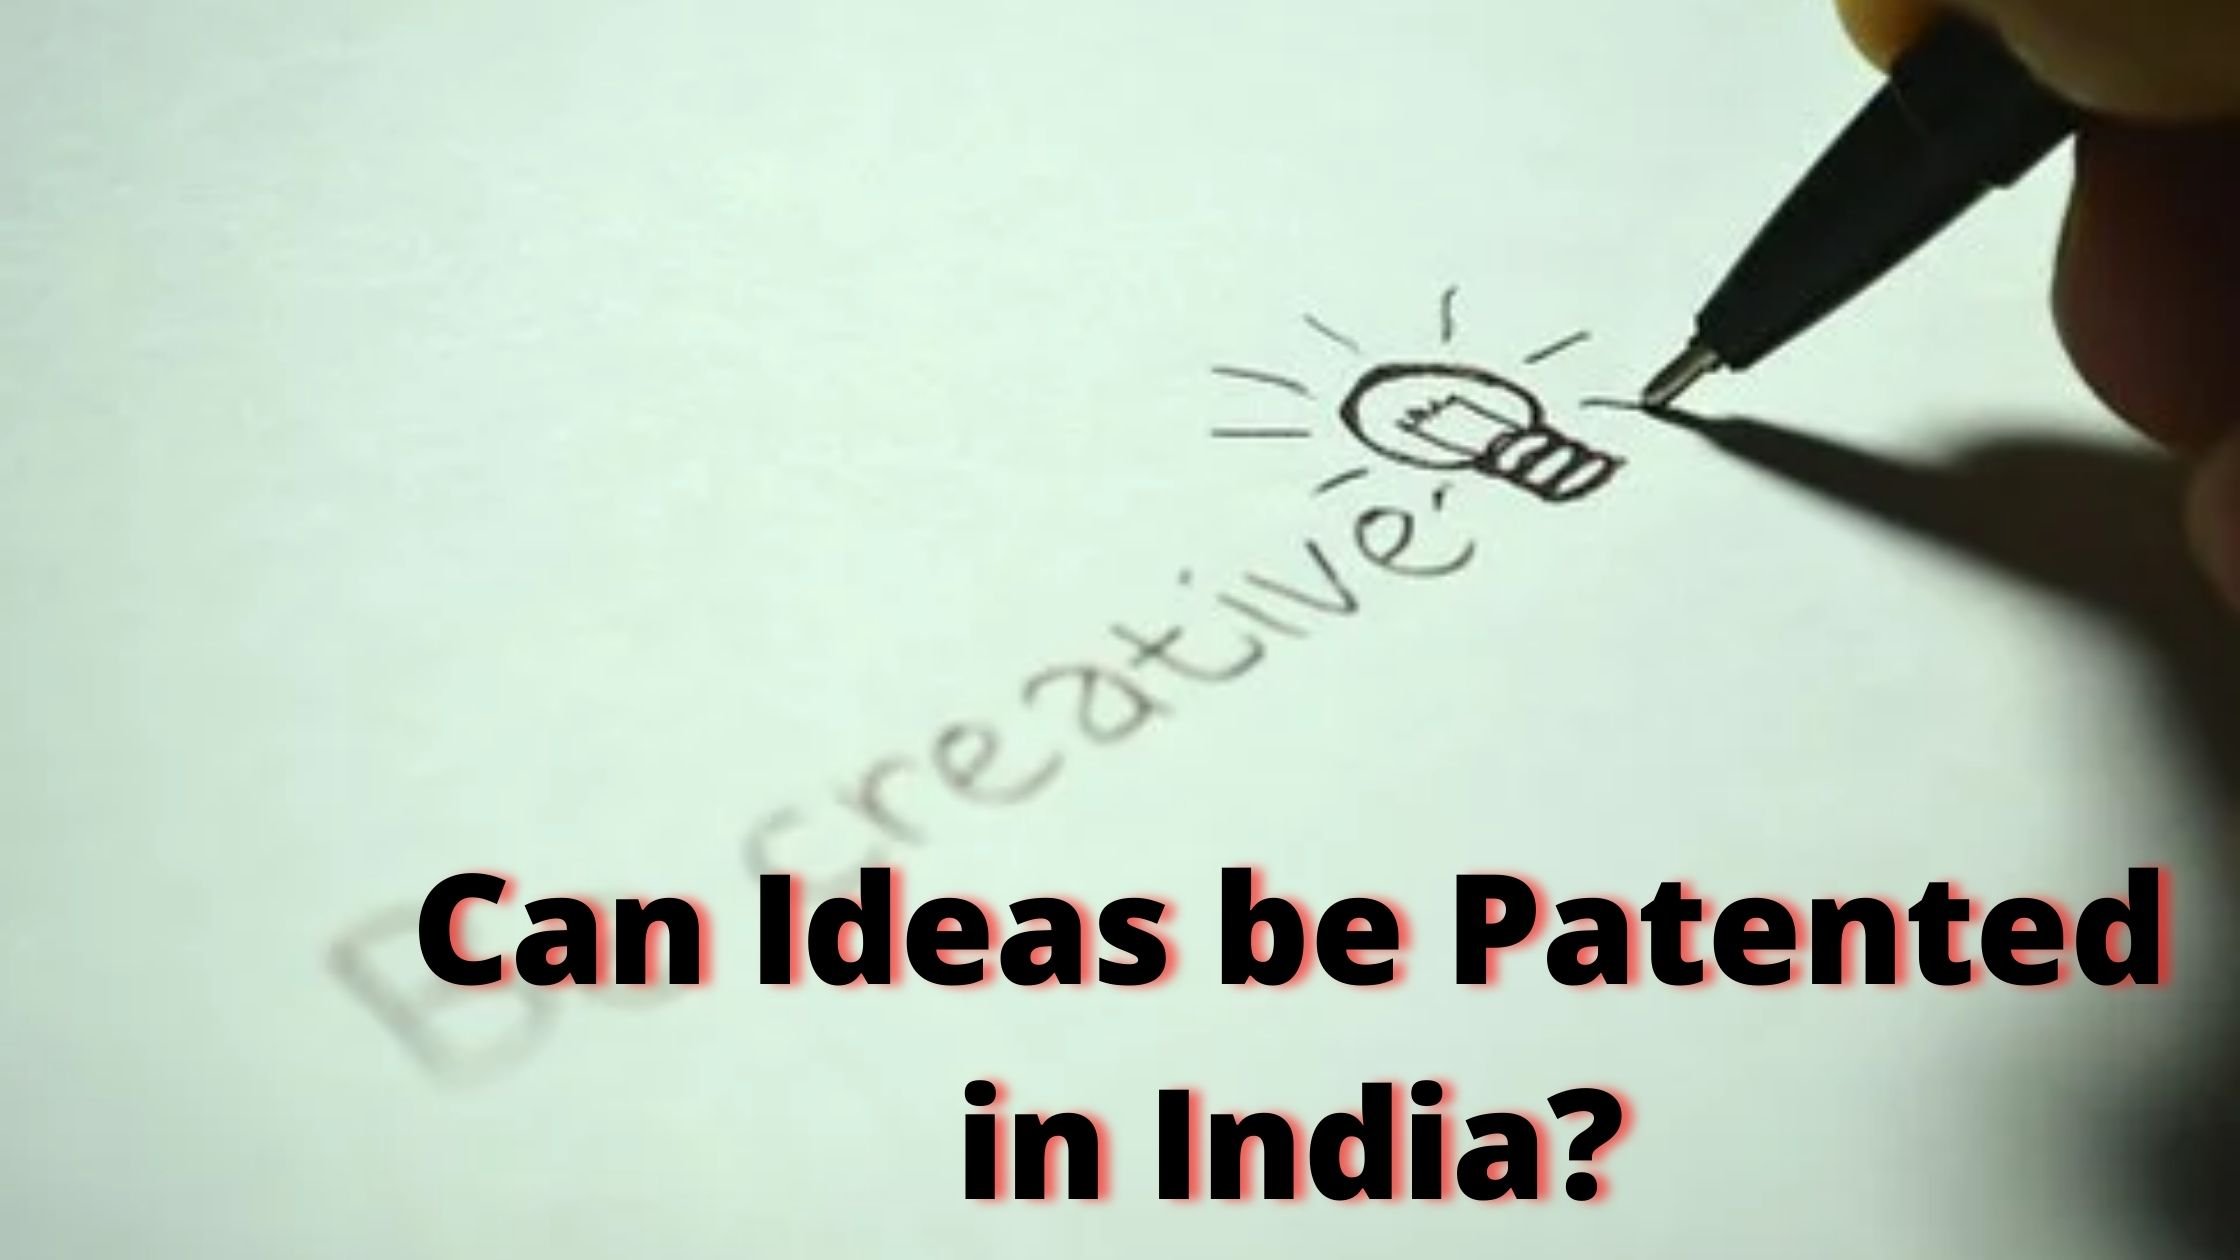 Can ideas be Patented in India?